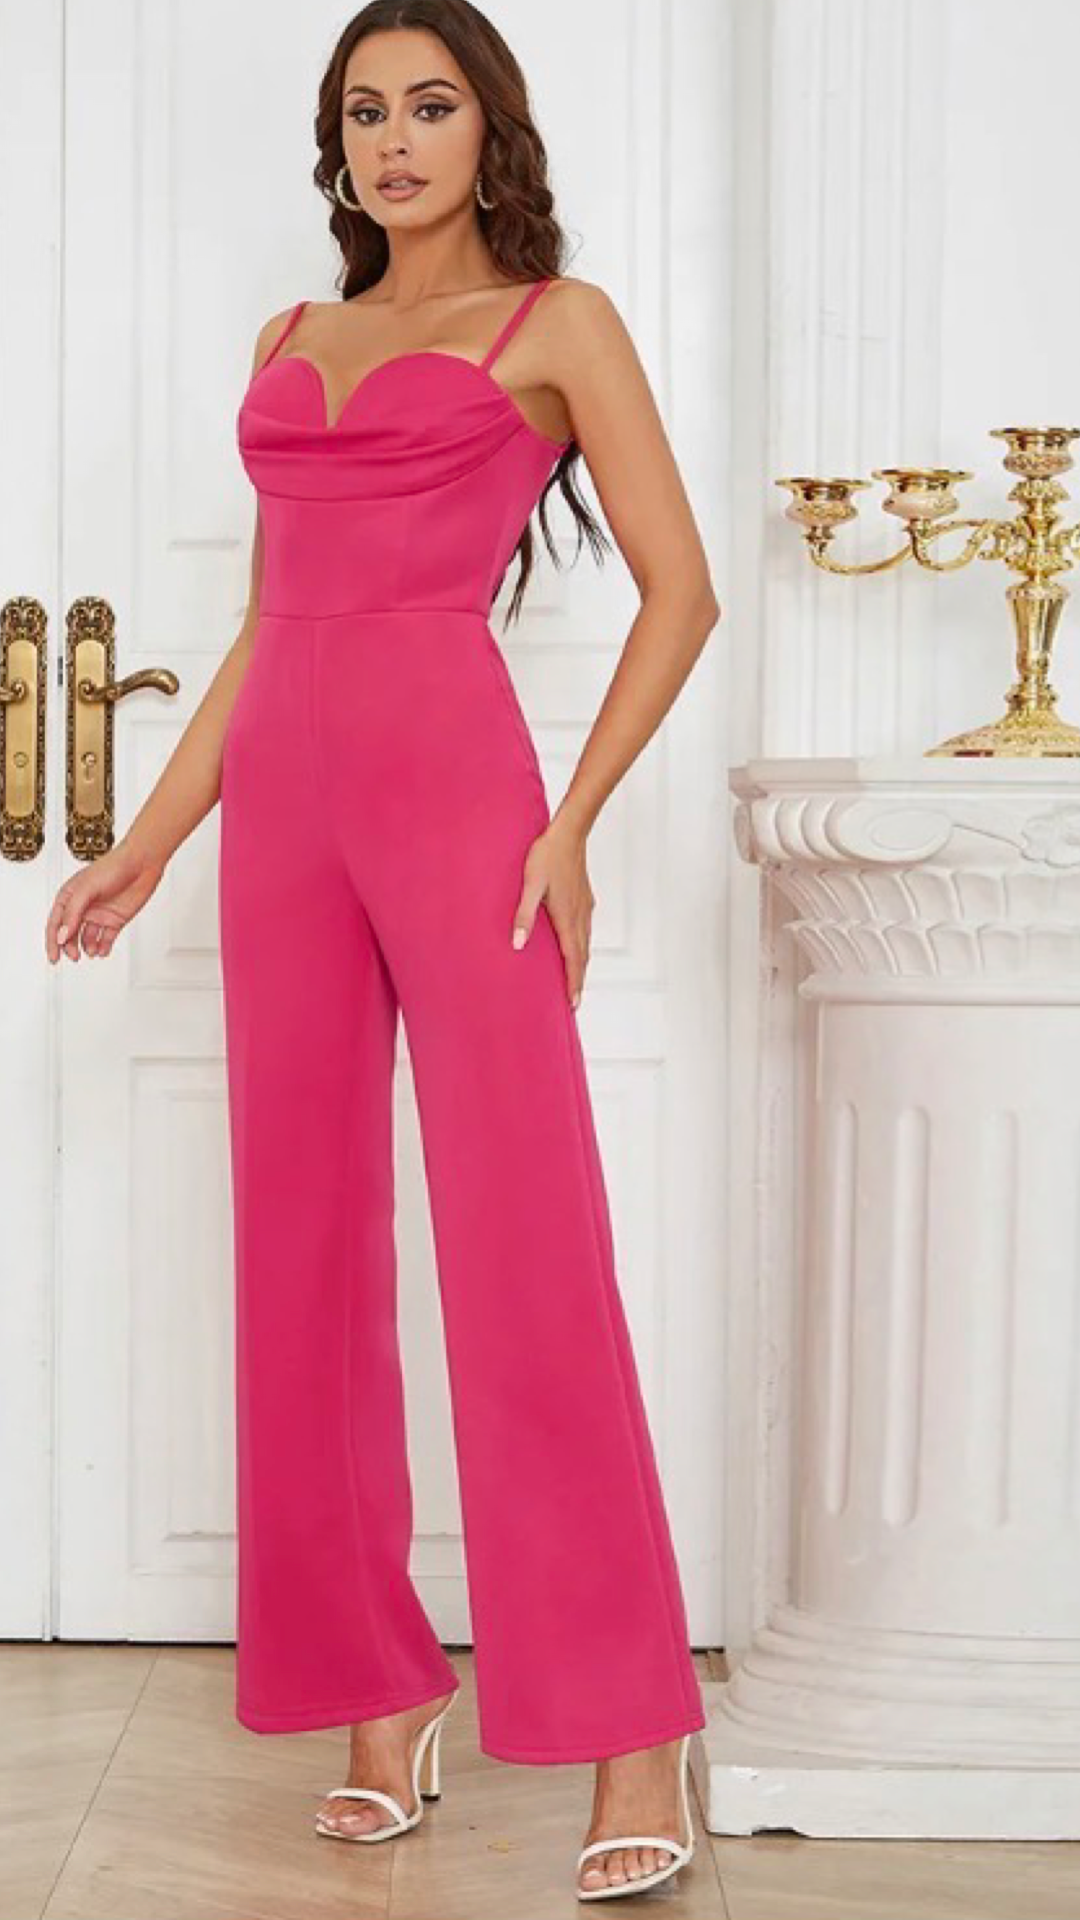 The Irresistible Sexy Jumpsuit